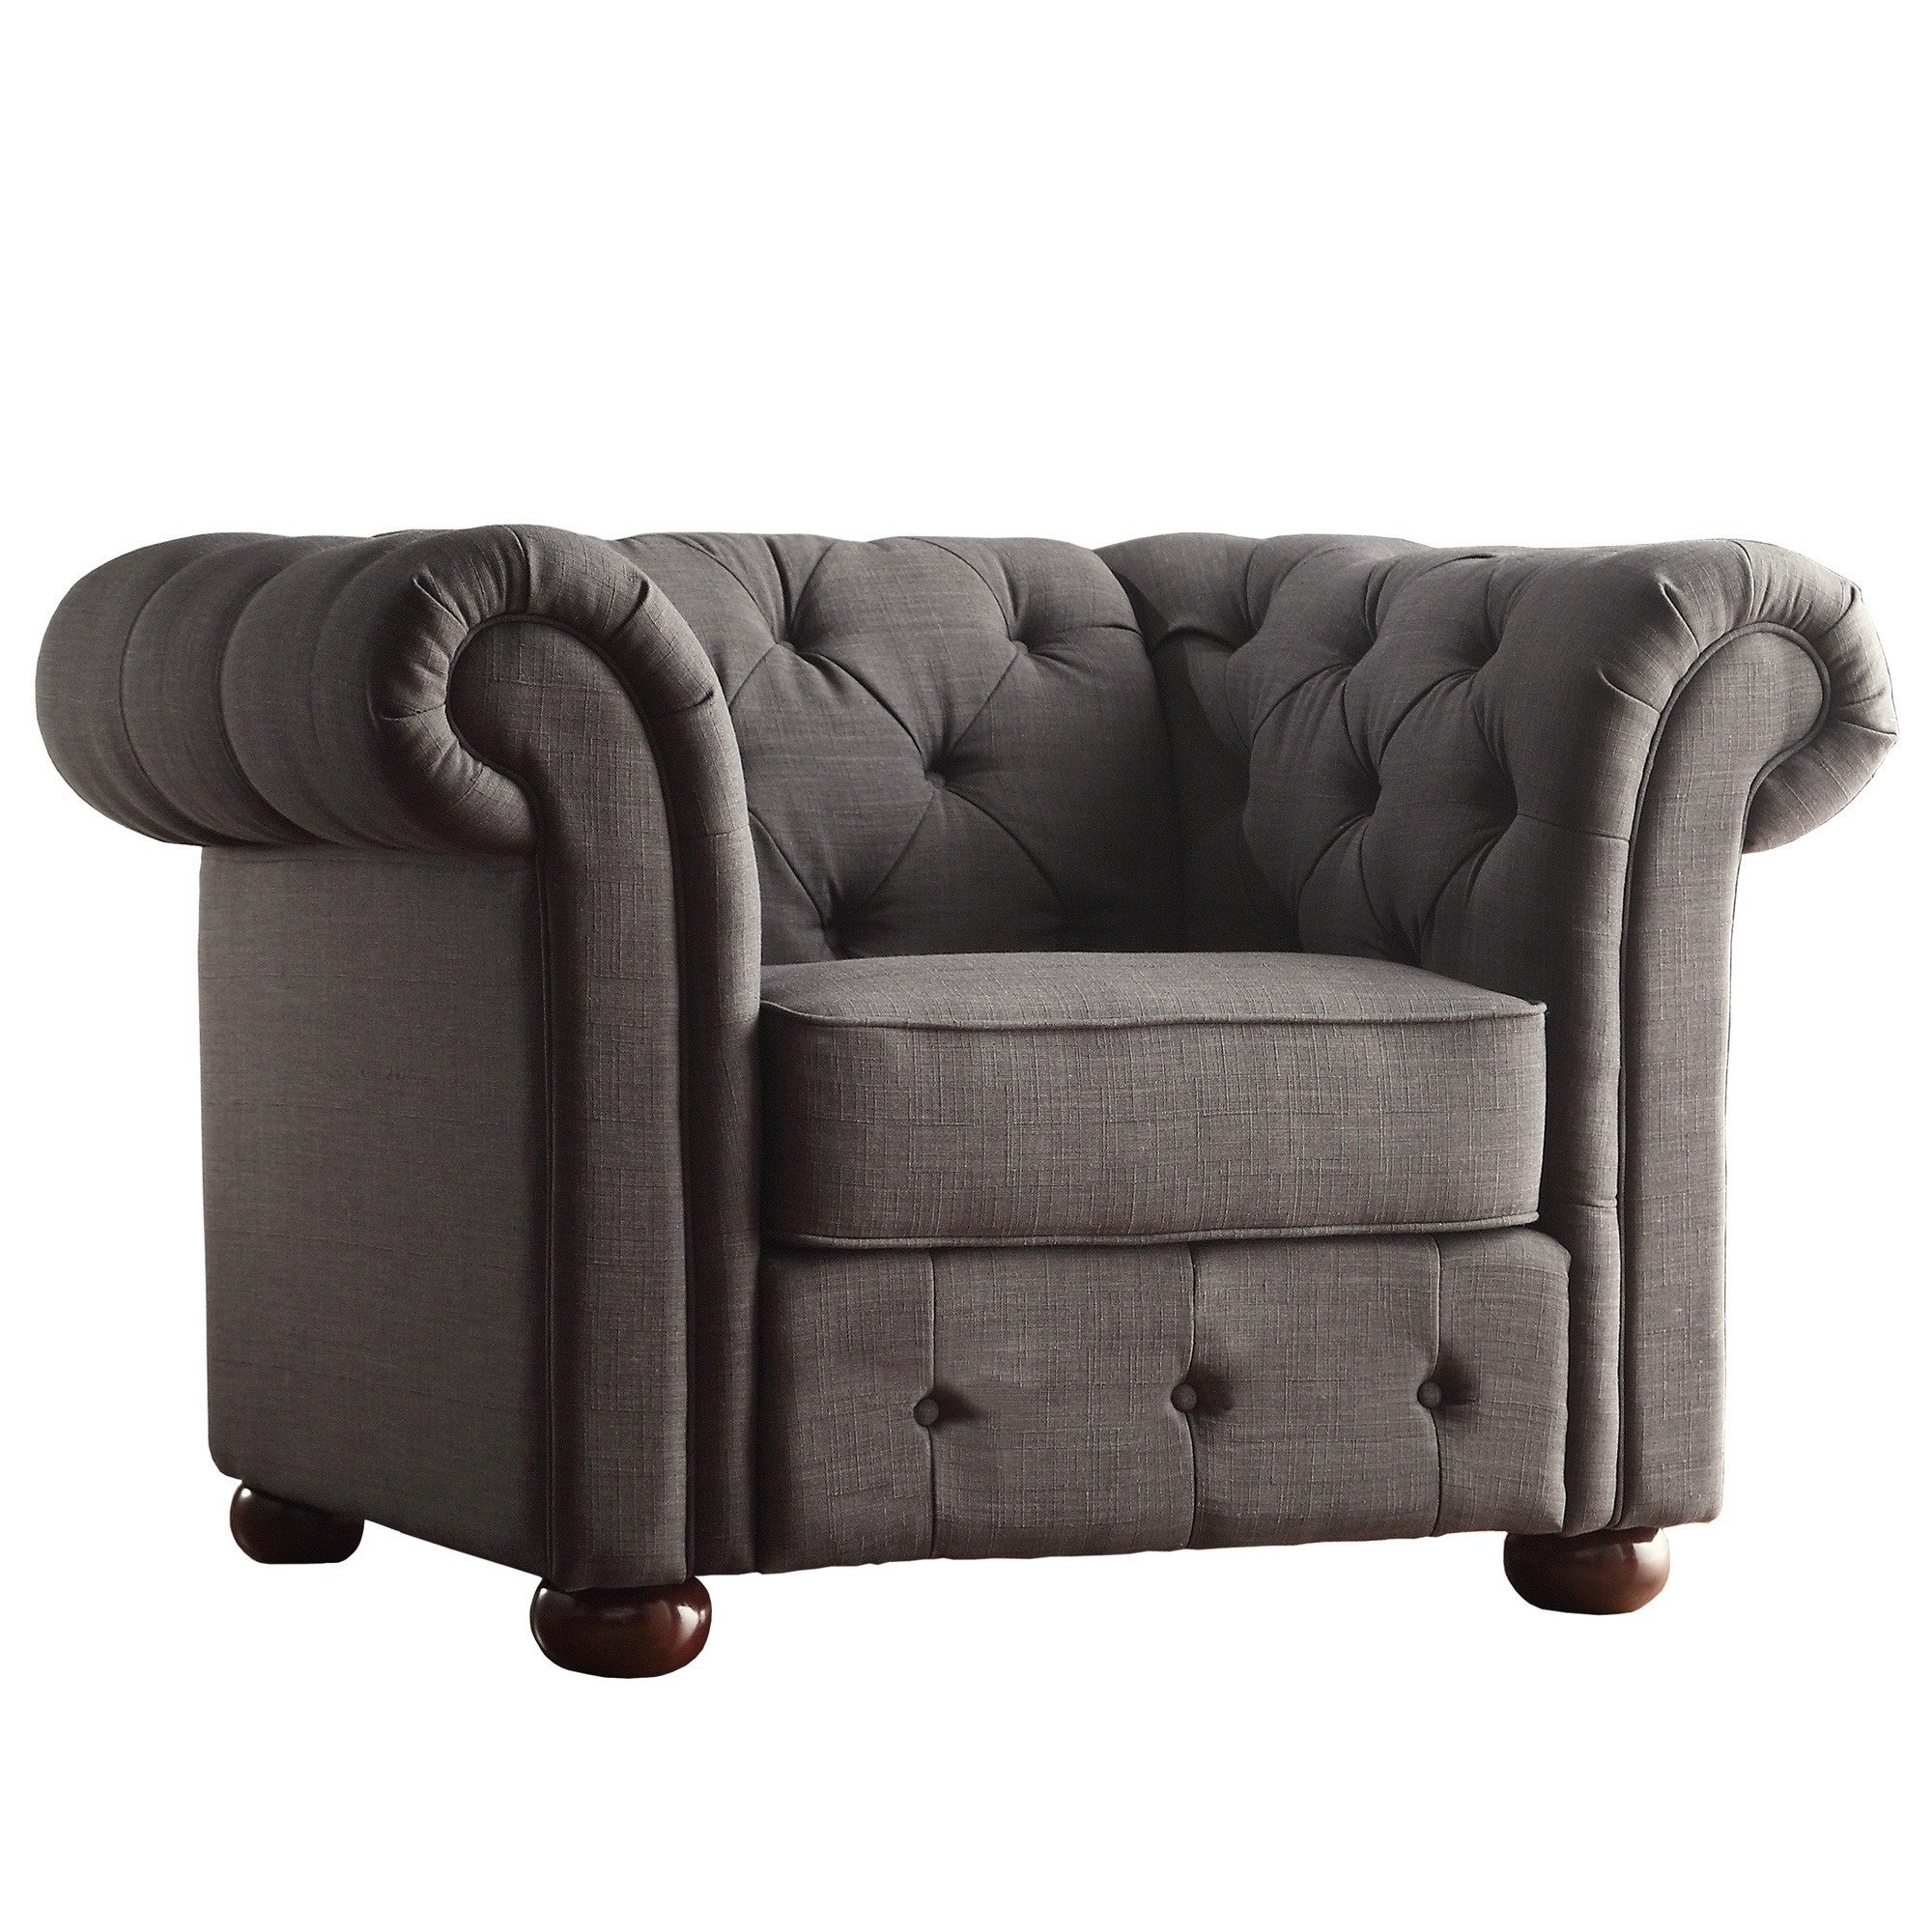 Shop Knightsbridge Linen Tufted Scroll Arm Chesterfield Chair by iNSPIRE Q  Artisan - On Sale - Free Shipping Today - Overstock - 9242321